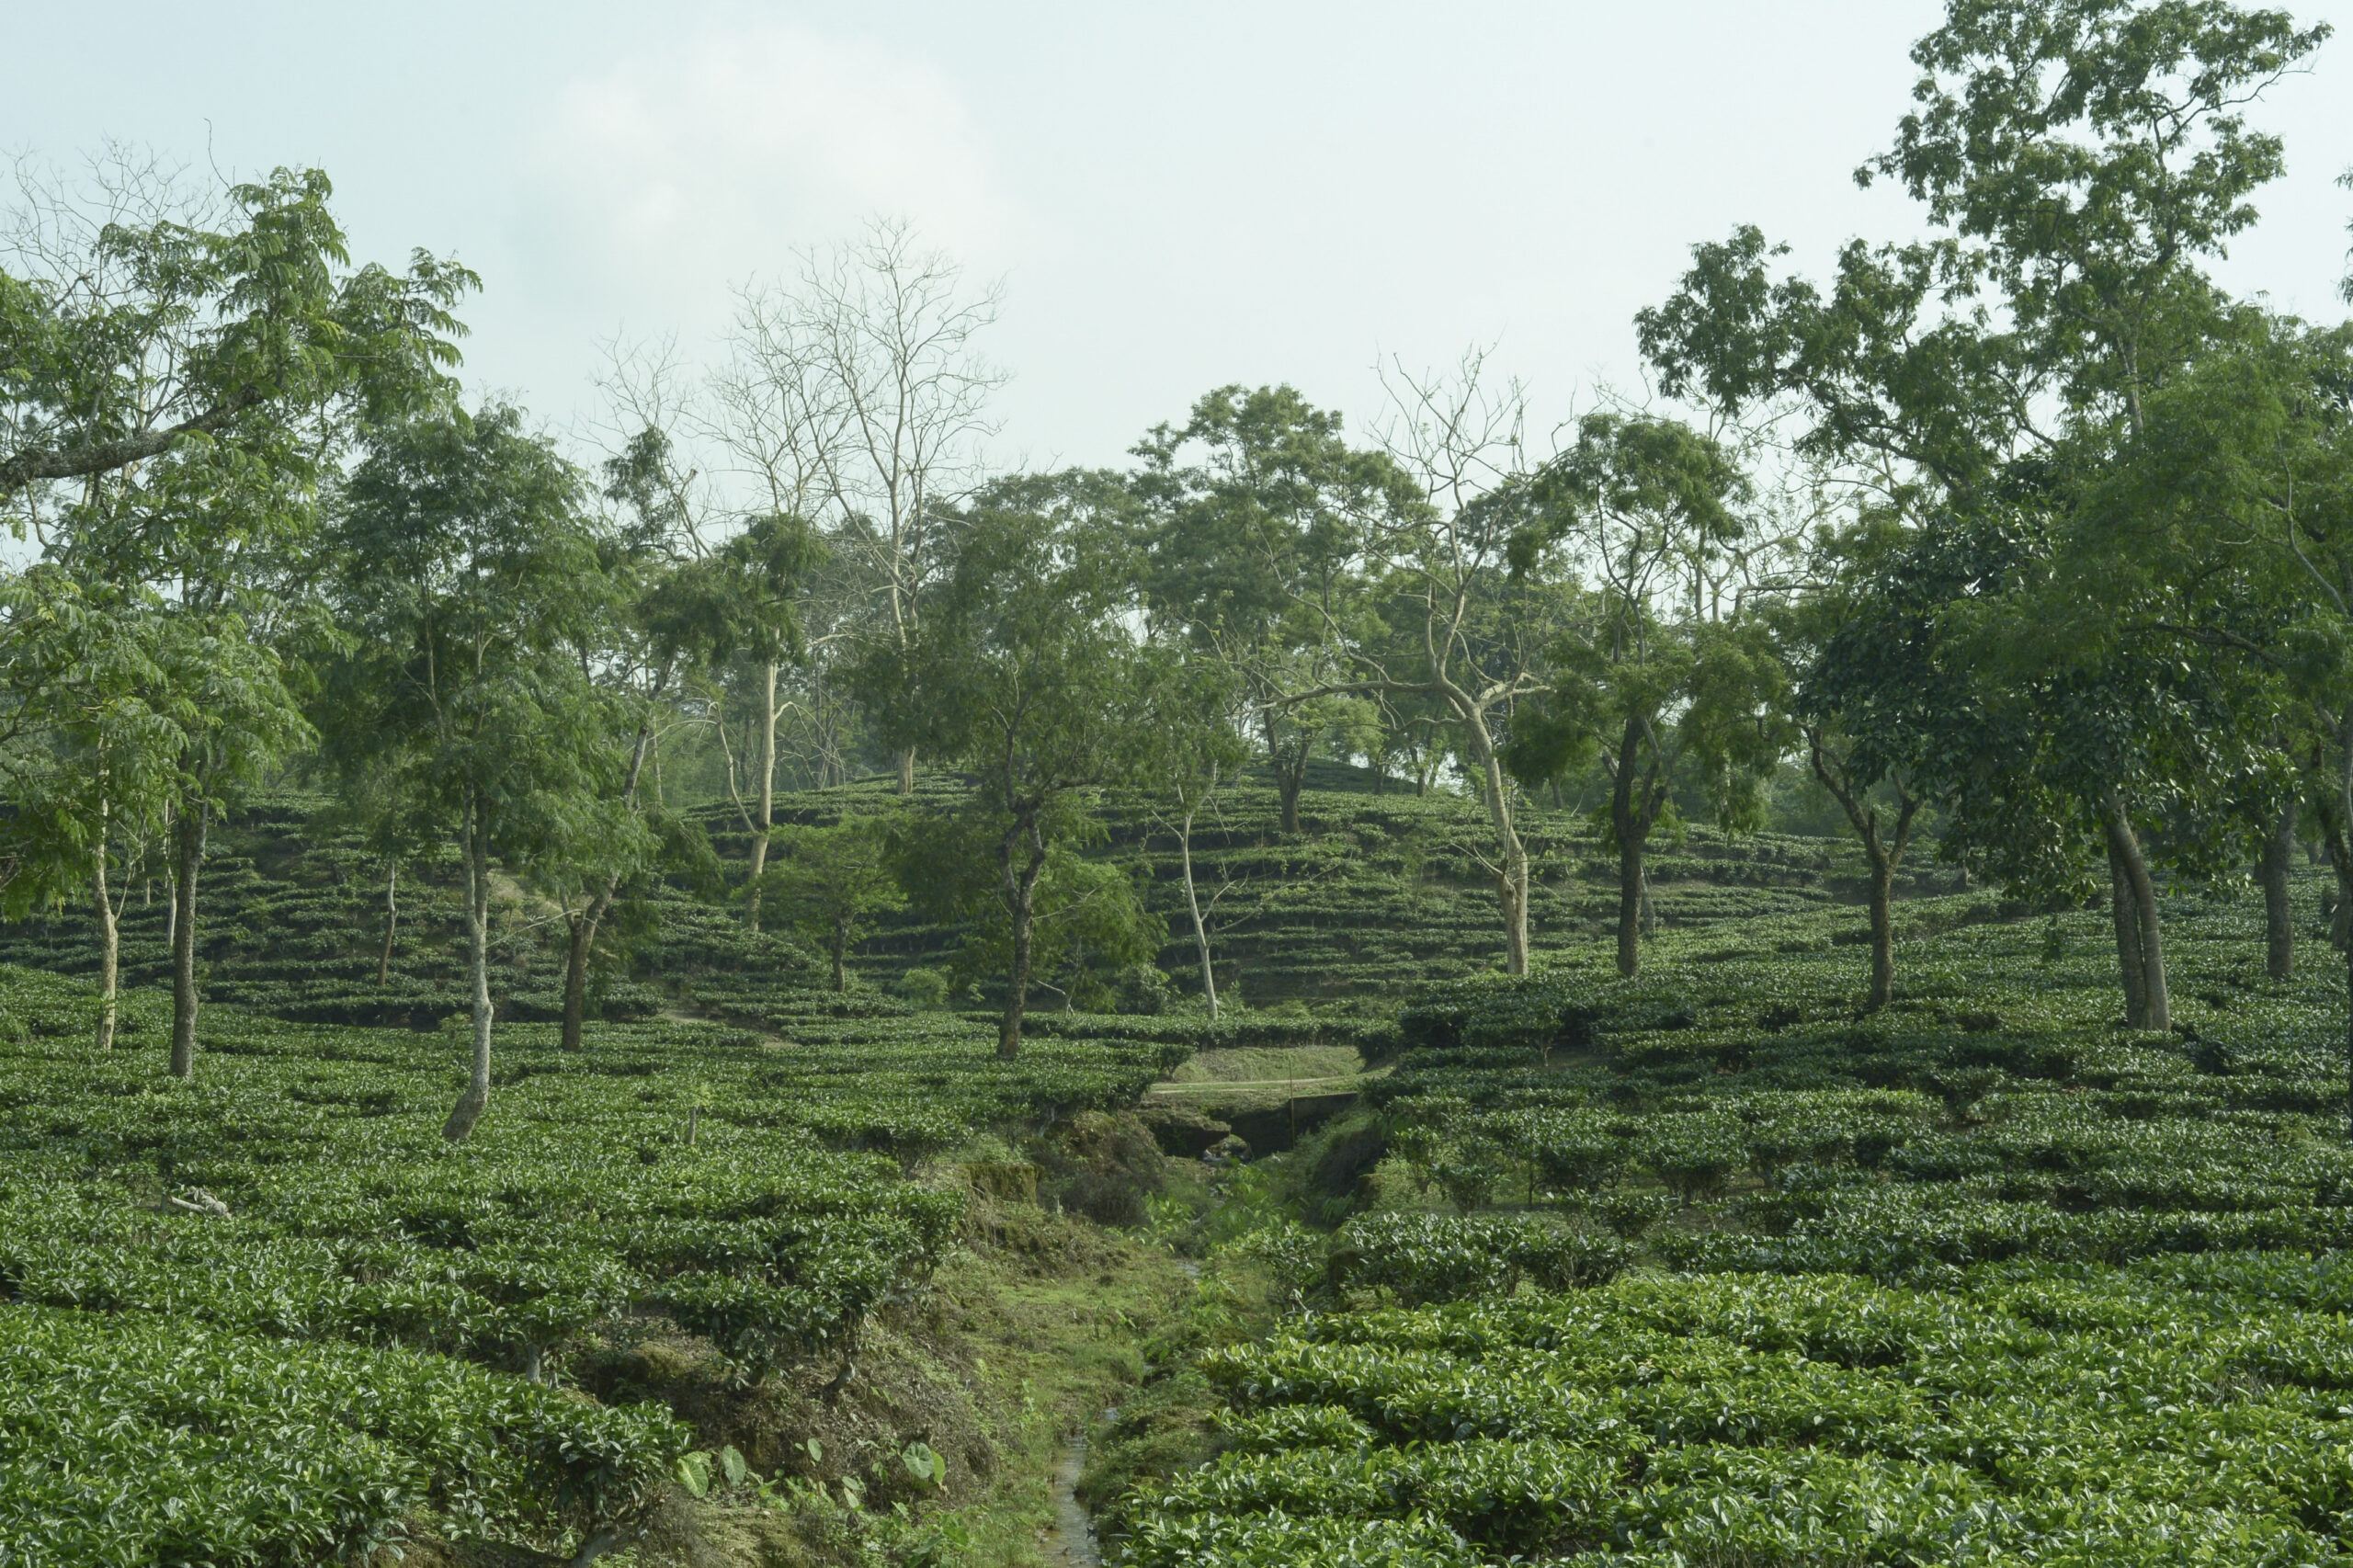 A tea plantation in Sivasagar district of Assam.  The tea bushes are planted close together to make harvesting easier.  However, when the tea pickers enter the middle of the field with waist-high tea plants, their feet are completely hidden from view and they cannot see the things below.  This increases the risk of snakebite.  Photo: Bikash K. Bhattacharya